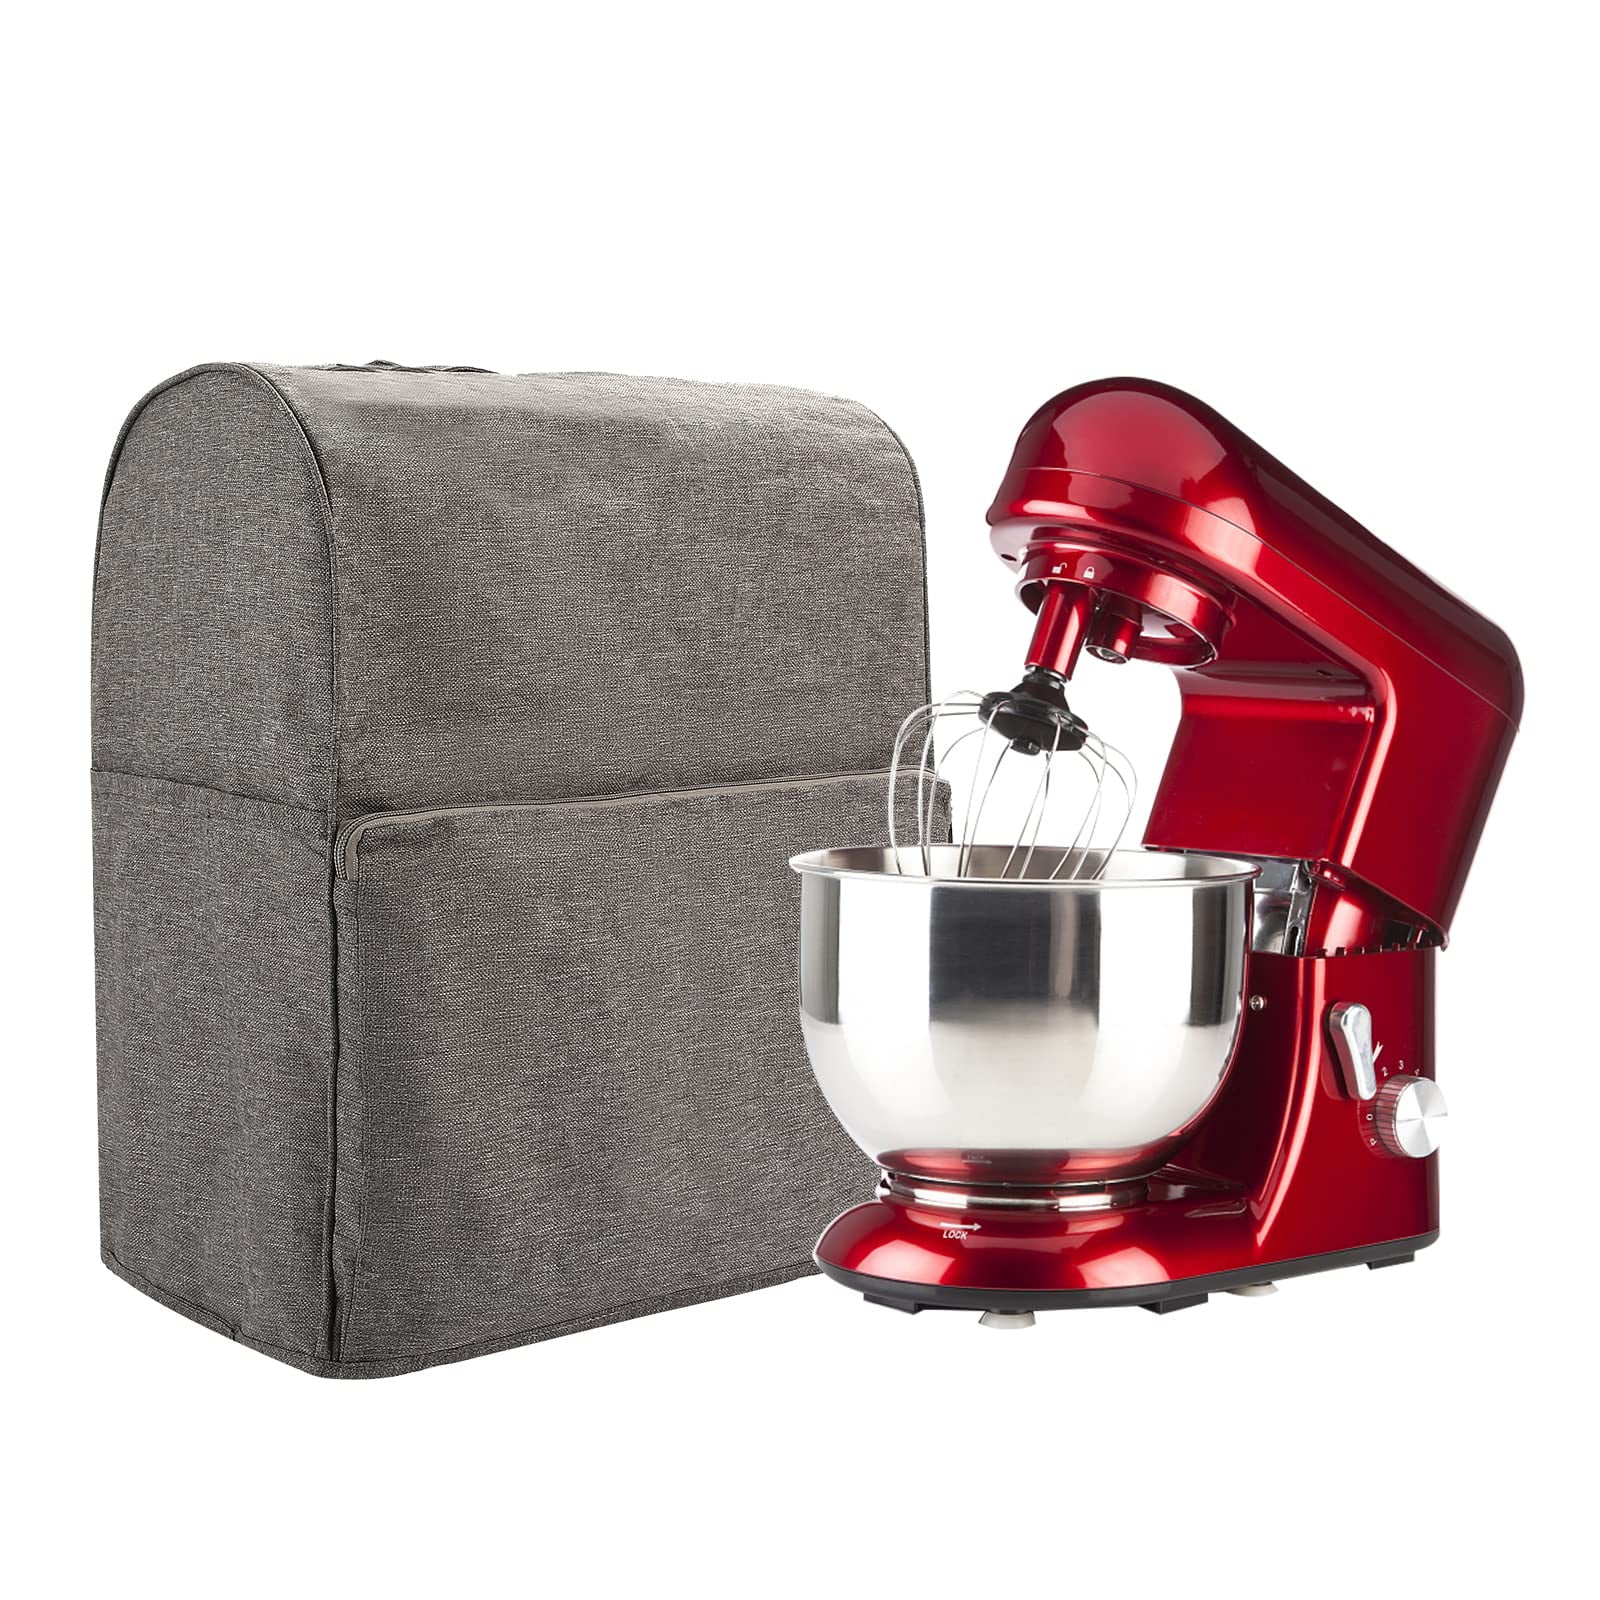 Stand Mixer Dust-Proof Cover with Pocket and Organizer Bag for  Kitchenaid,Sunbeam,Cuisinart (Black/Coffee/Red)